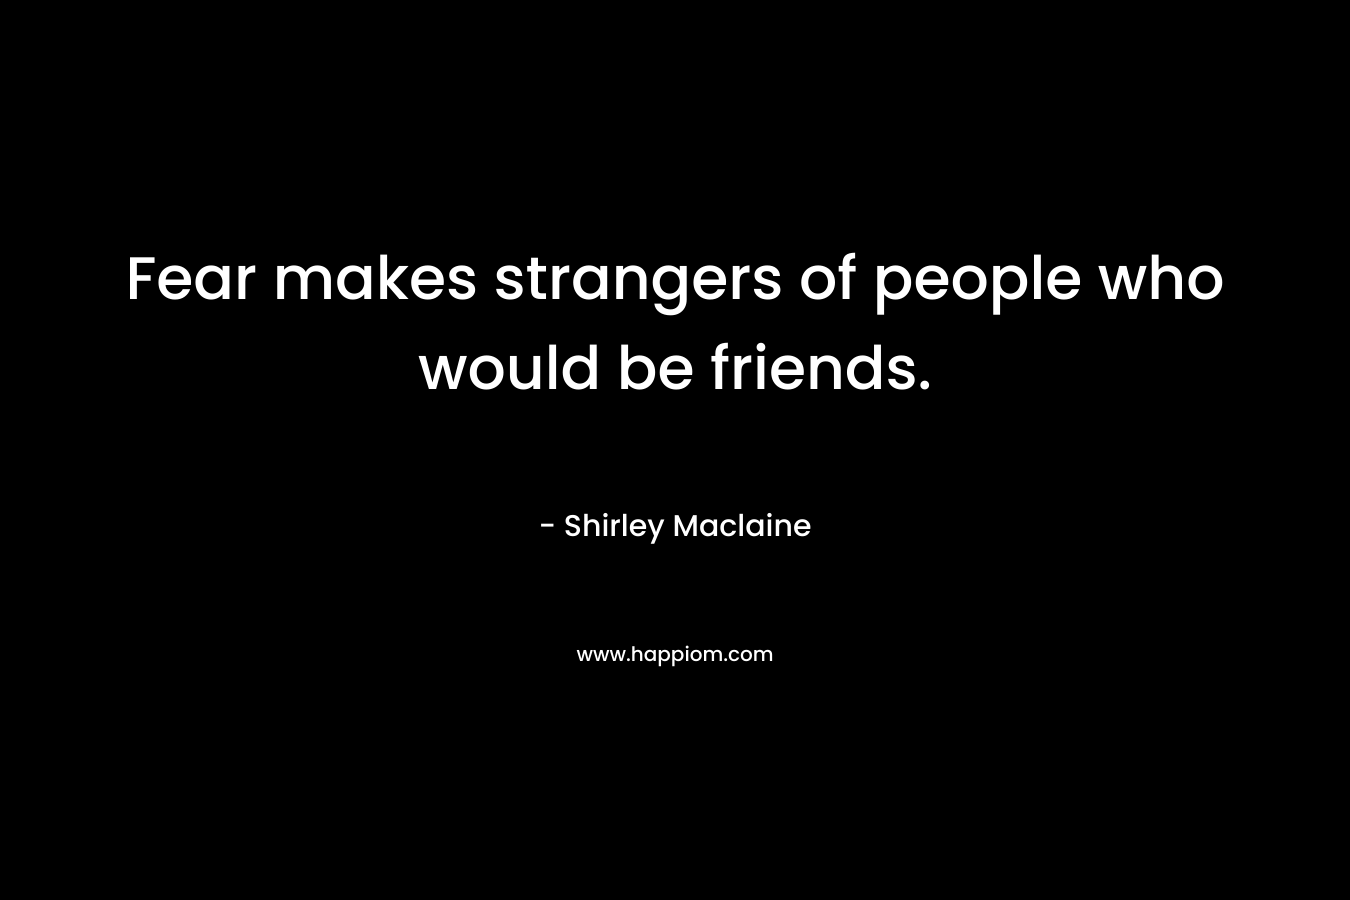 Fear makes strangers of people who would be friends. – Shirley Maclaine